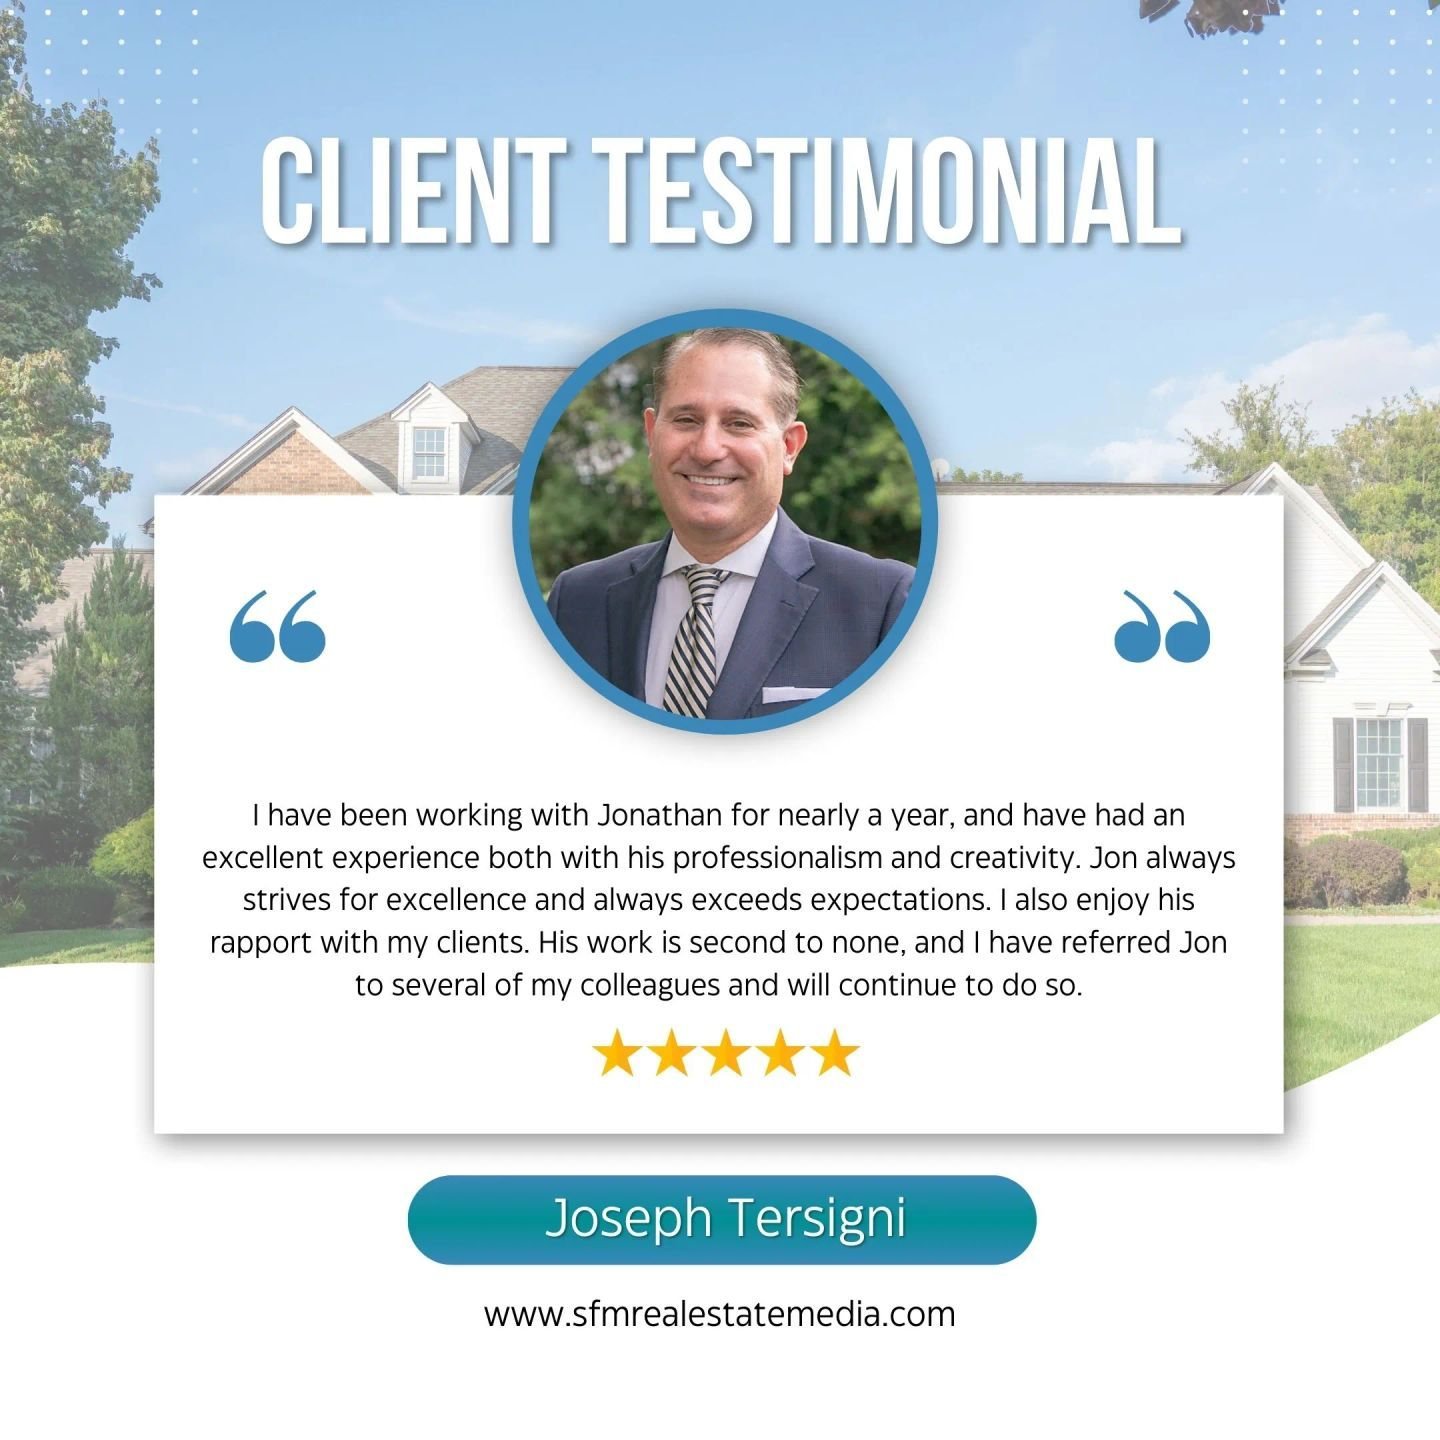 🎉 Ever get a compliment that makes you smile all day? That's what happened when Joseph Tersigni and I worked together. He shared some kind words about our recent real estate shoot that sincerely touched our hearts. 
 
 
There's no better feeling tha